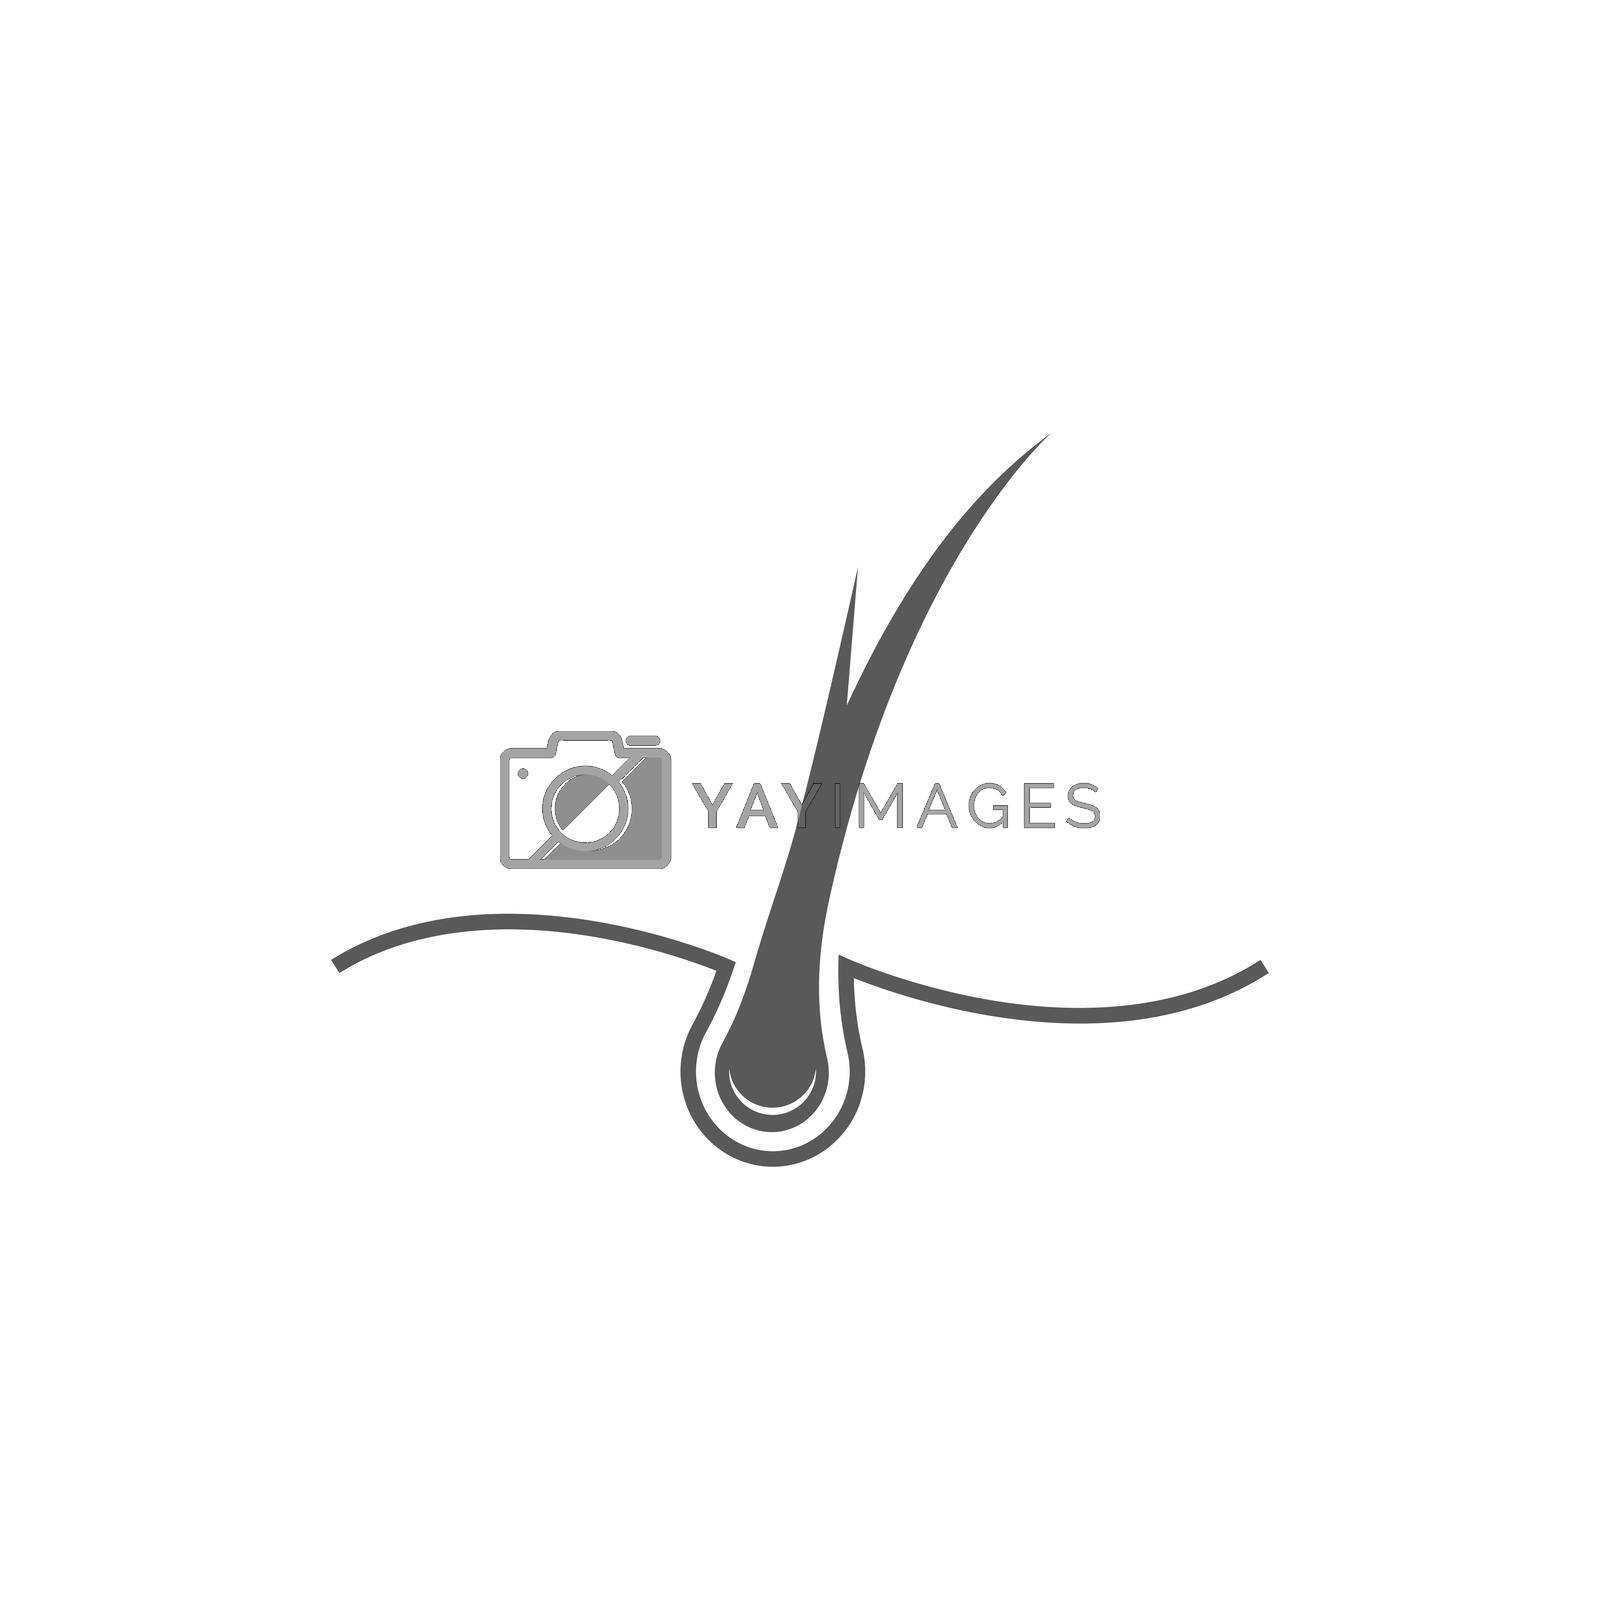 Royalty free image of Hair treatment logo by awk